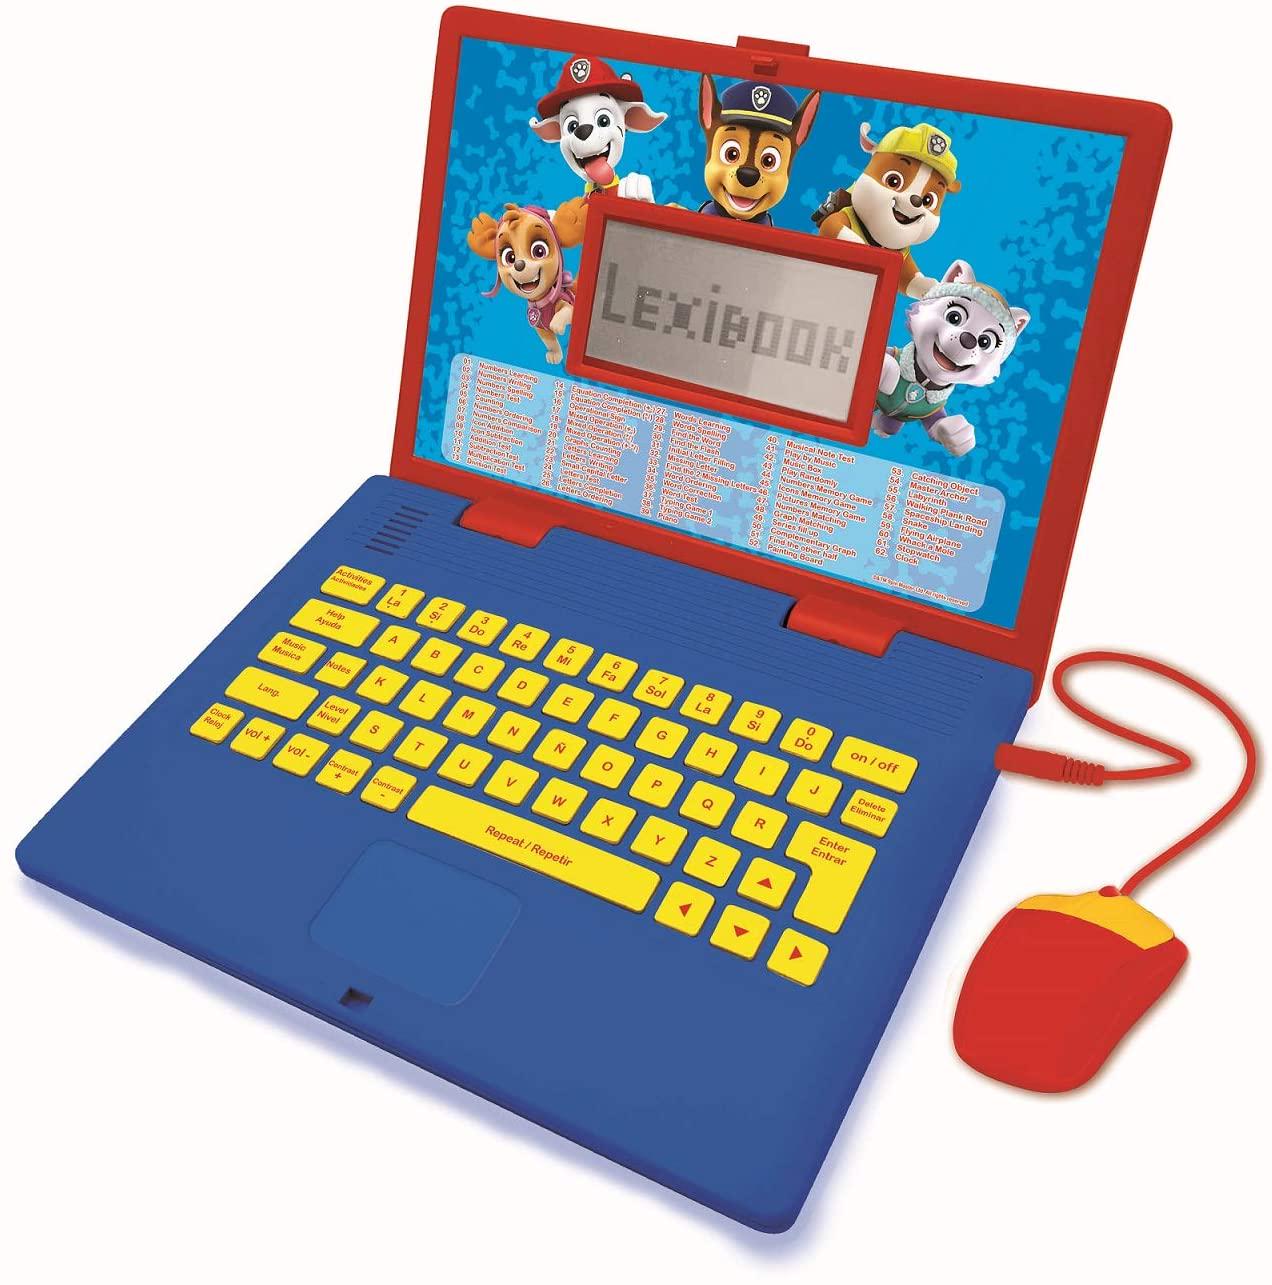 Lexibook, LEXIBOOK Paw Patrol-Educational and Bilingual Laptop Spanish/English-Toy for Child Kid (Boys and Girls) 124 Activities, Learn Play Games and Music with Chase Marshall-Red/Blue JC598PAi2